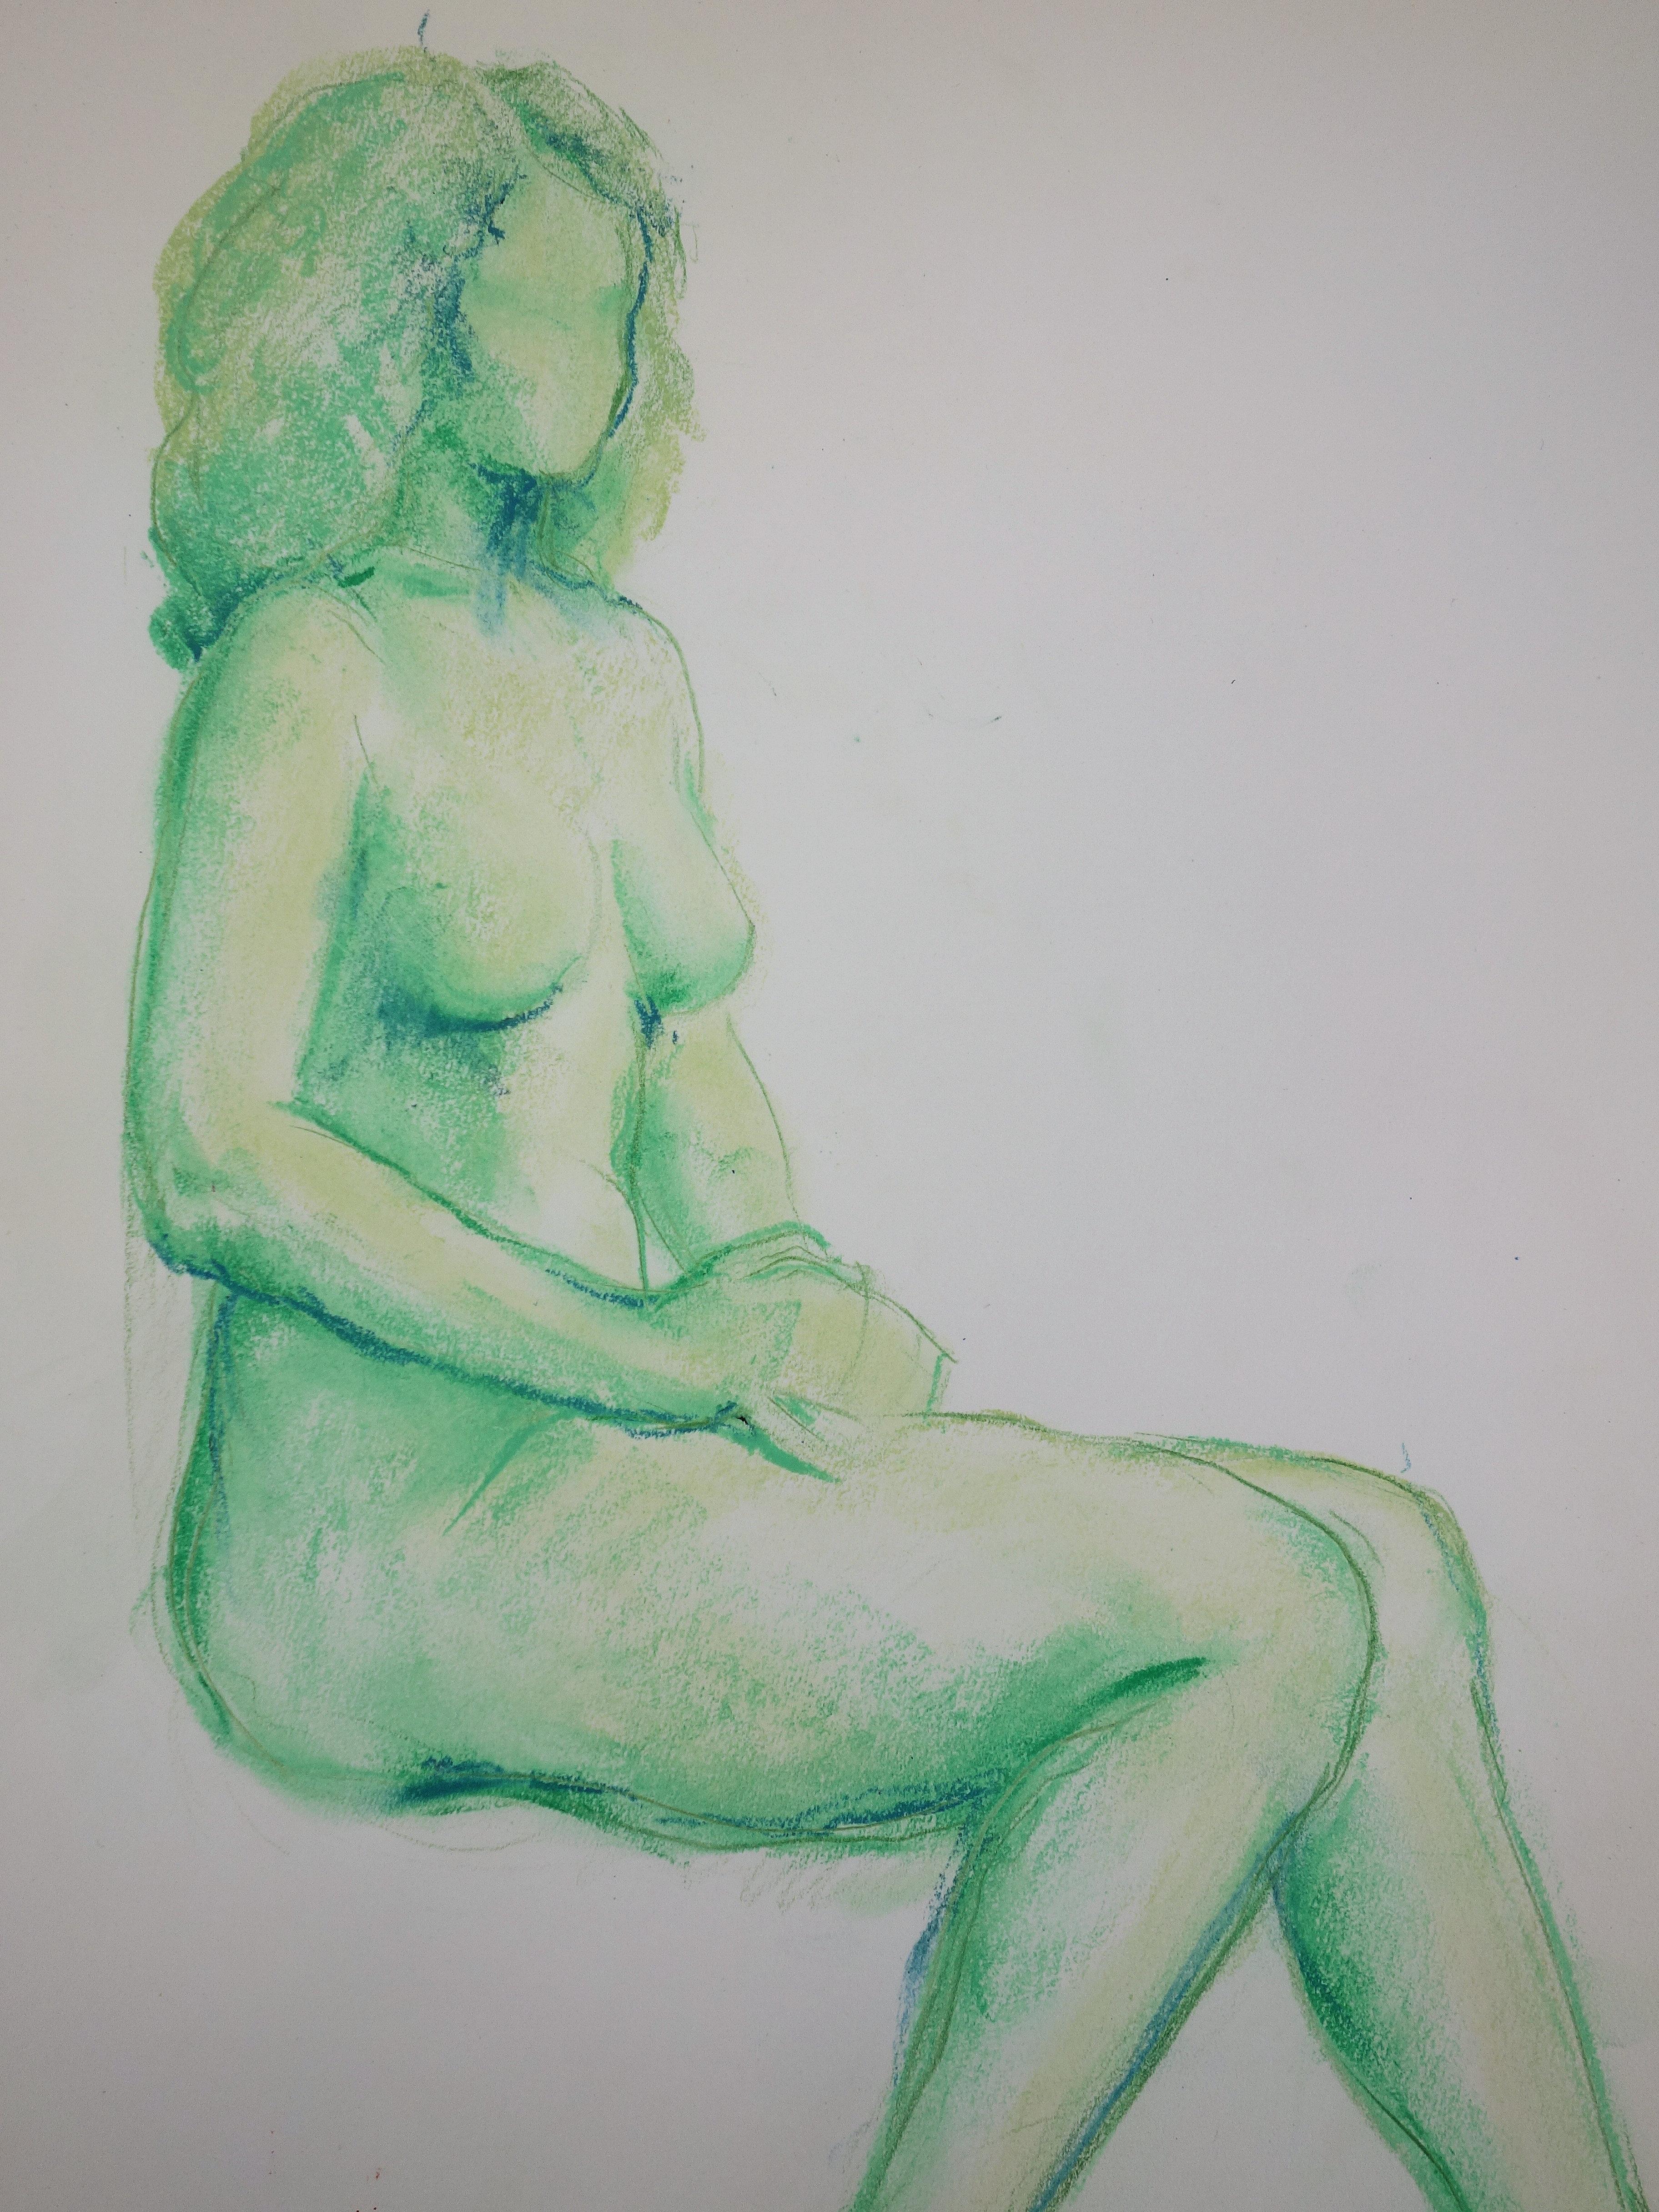 Gaston COPPENS (1909 - 2002)
Nude in Green 

Original charcoal drawing
Bears the stamped signature of the artist
Stamp of the artist studio on the back
On wove paper 41 x 32 cm (c. 16 x 13 inch)

Excellent condition

Gaston Coppens studied sculpture